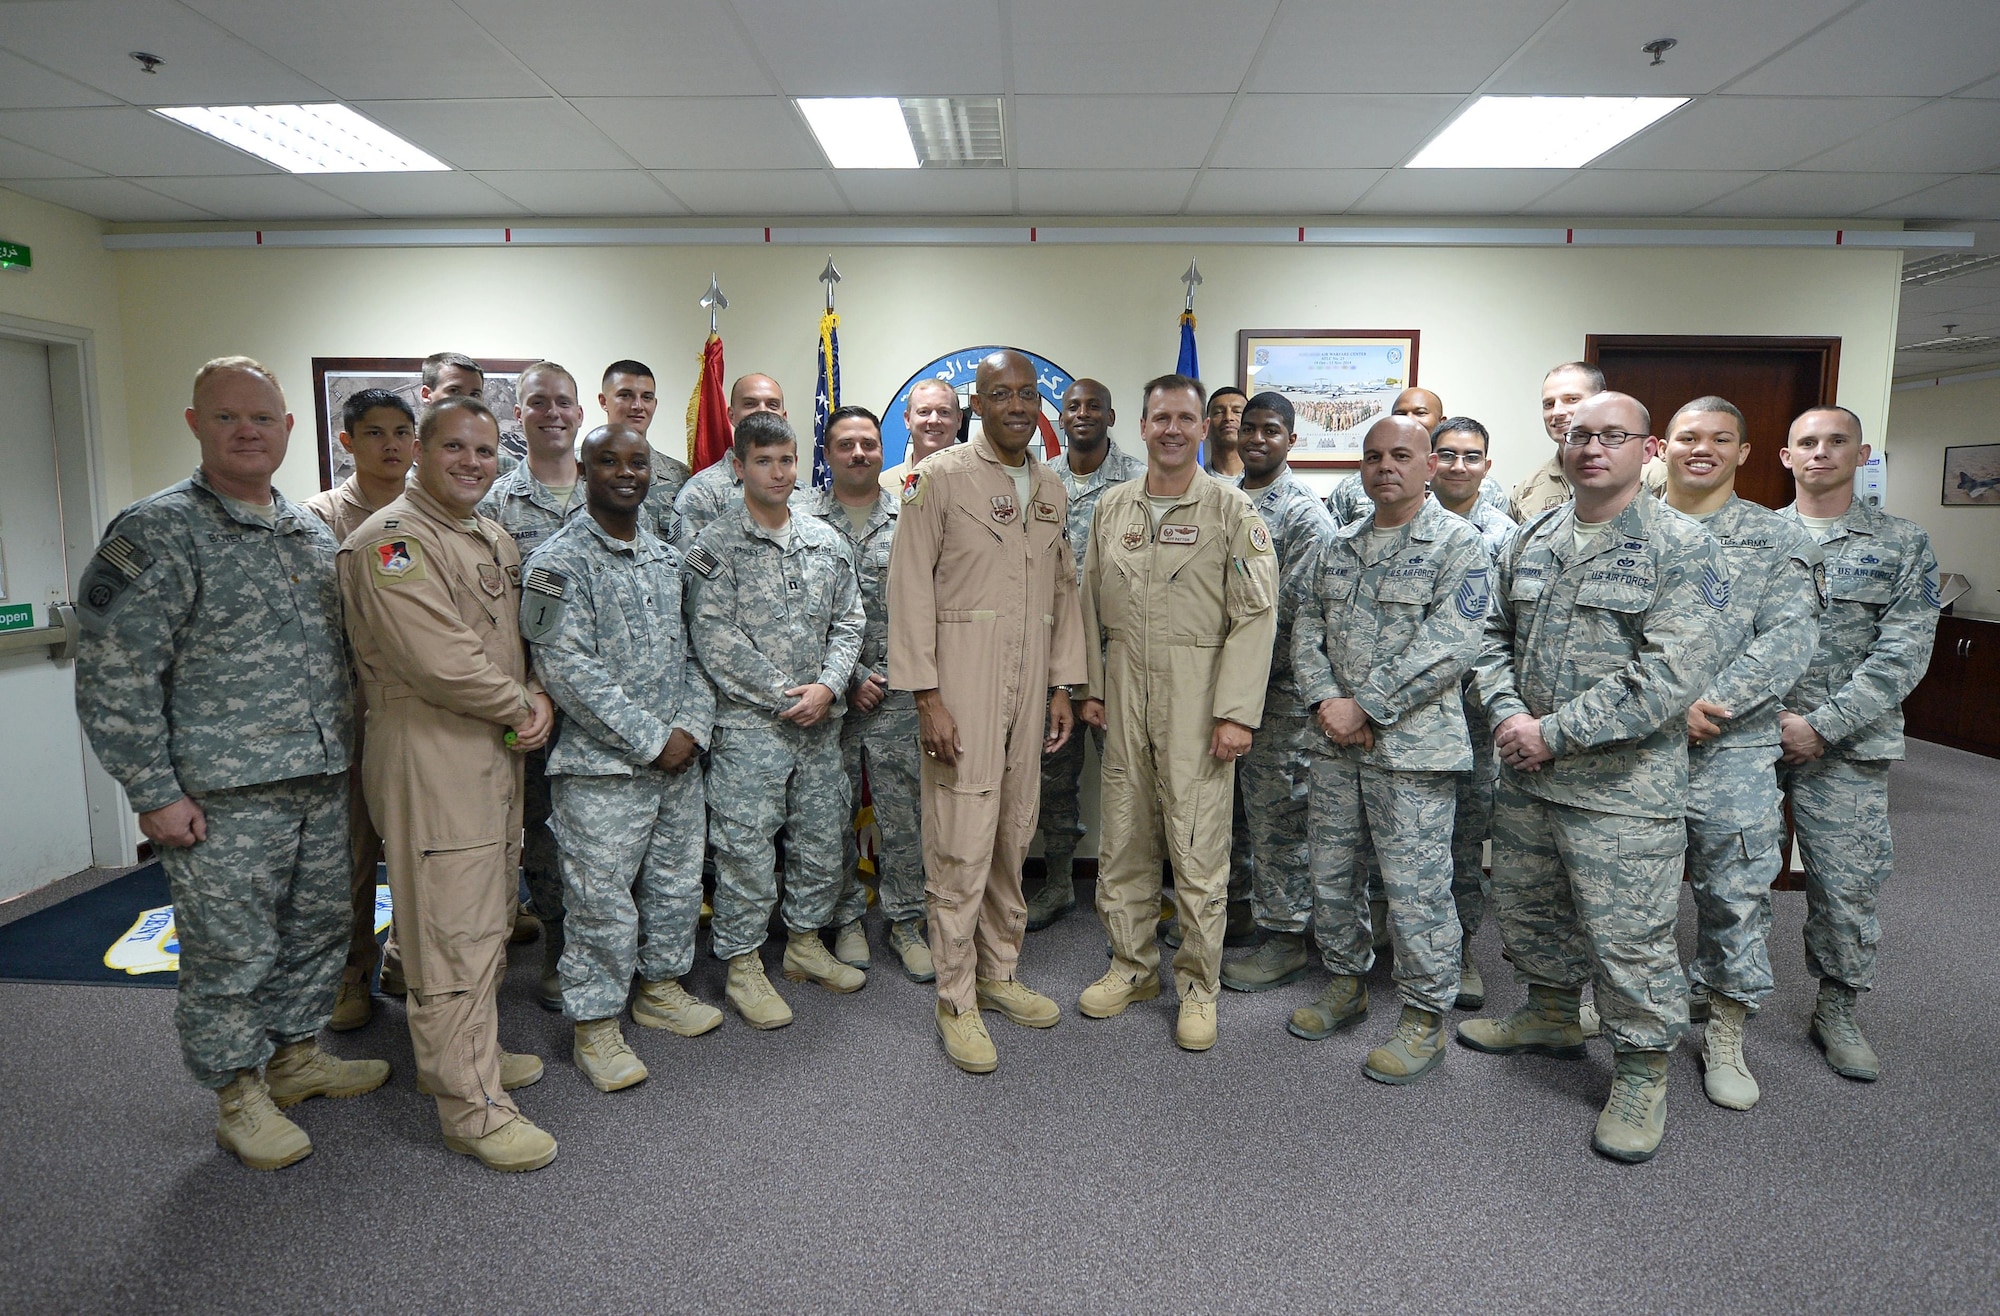 Lt. Gen. C. Q. Brown Jr., commander of U.S. Air Forces Central Command, poses with Airmen and Soldiers from the Air Warfare Center after a change of command ceremony Aug. 12, 2015. The Air Warfare Center was first conceived in 2000 at the Middle East Air Symposium with a vision of a large force training course to develop tactical leaders for Gulf Cooperation council air forces.  (U.S. Air Force photo/Tech. Sgt. Jeff Andrejcik)